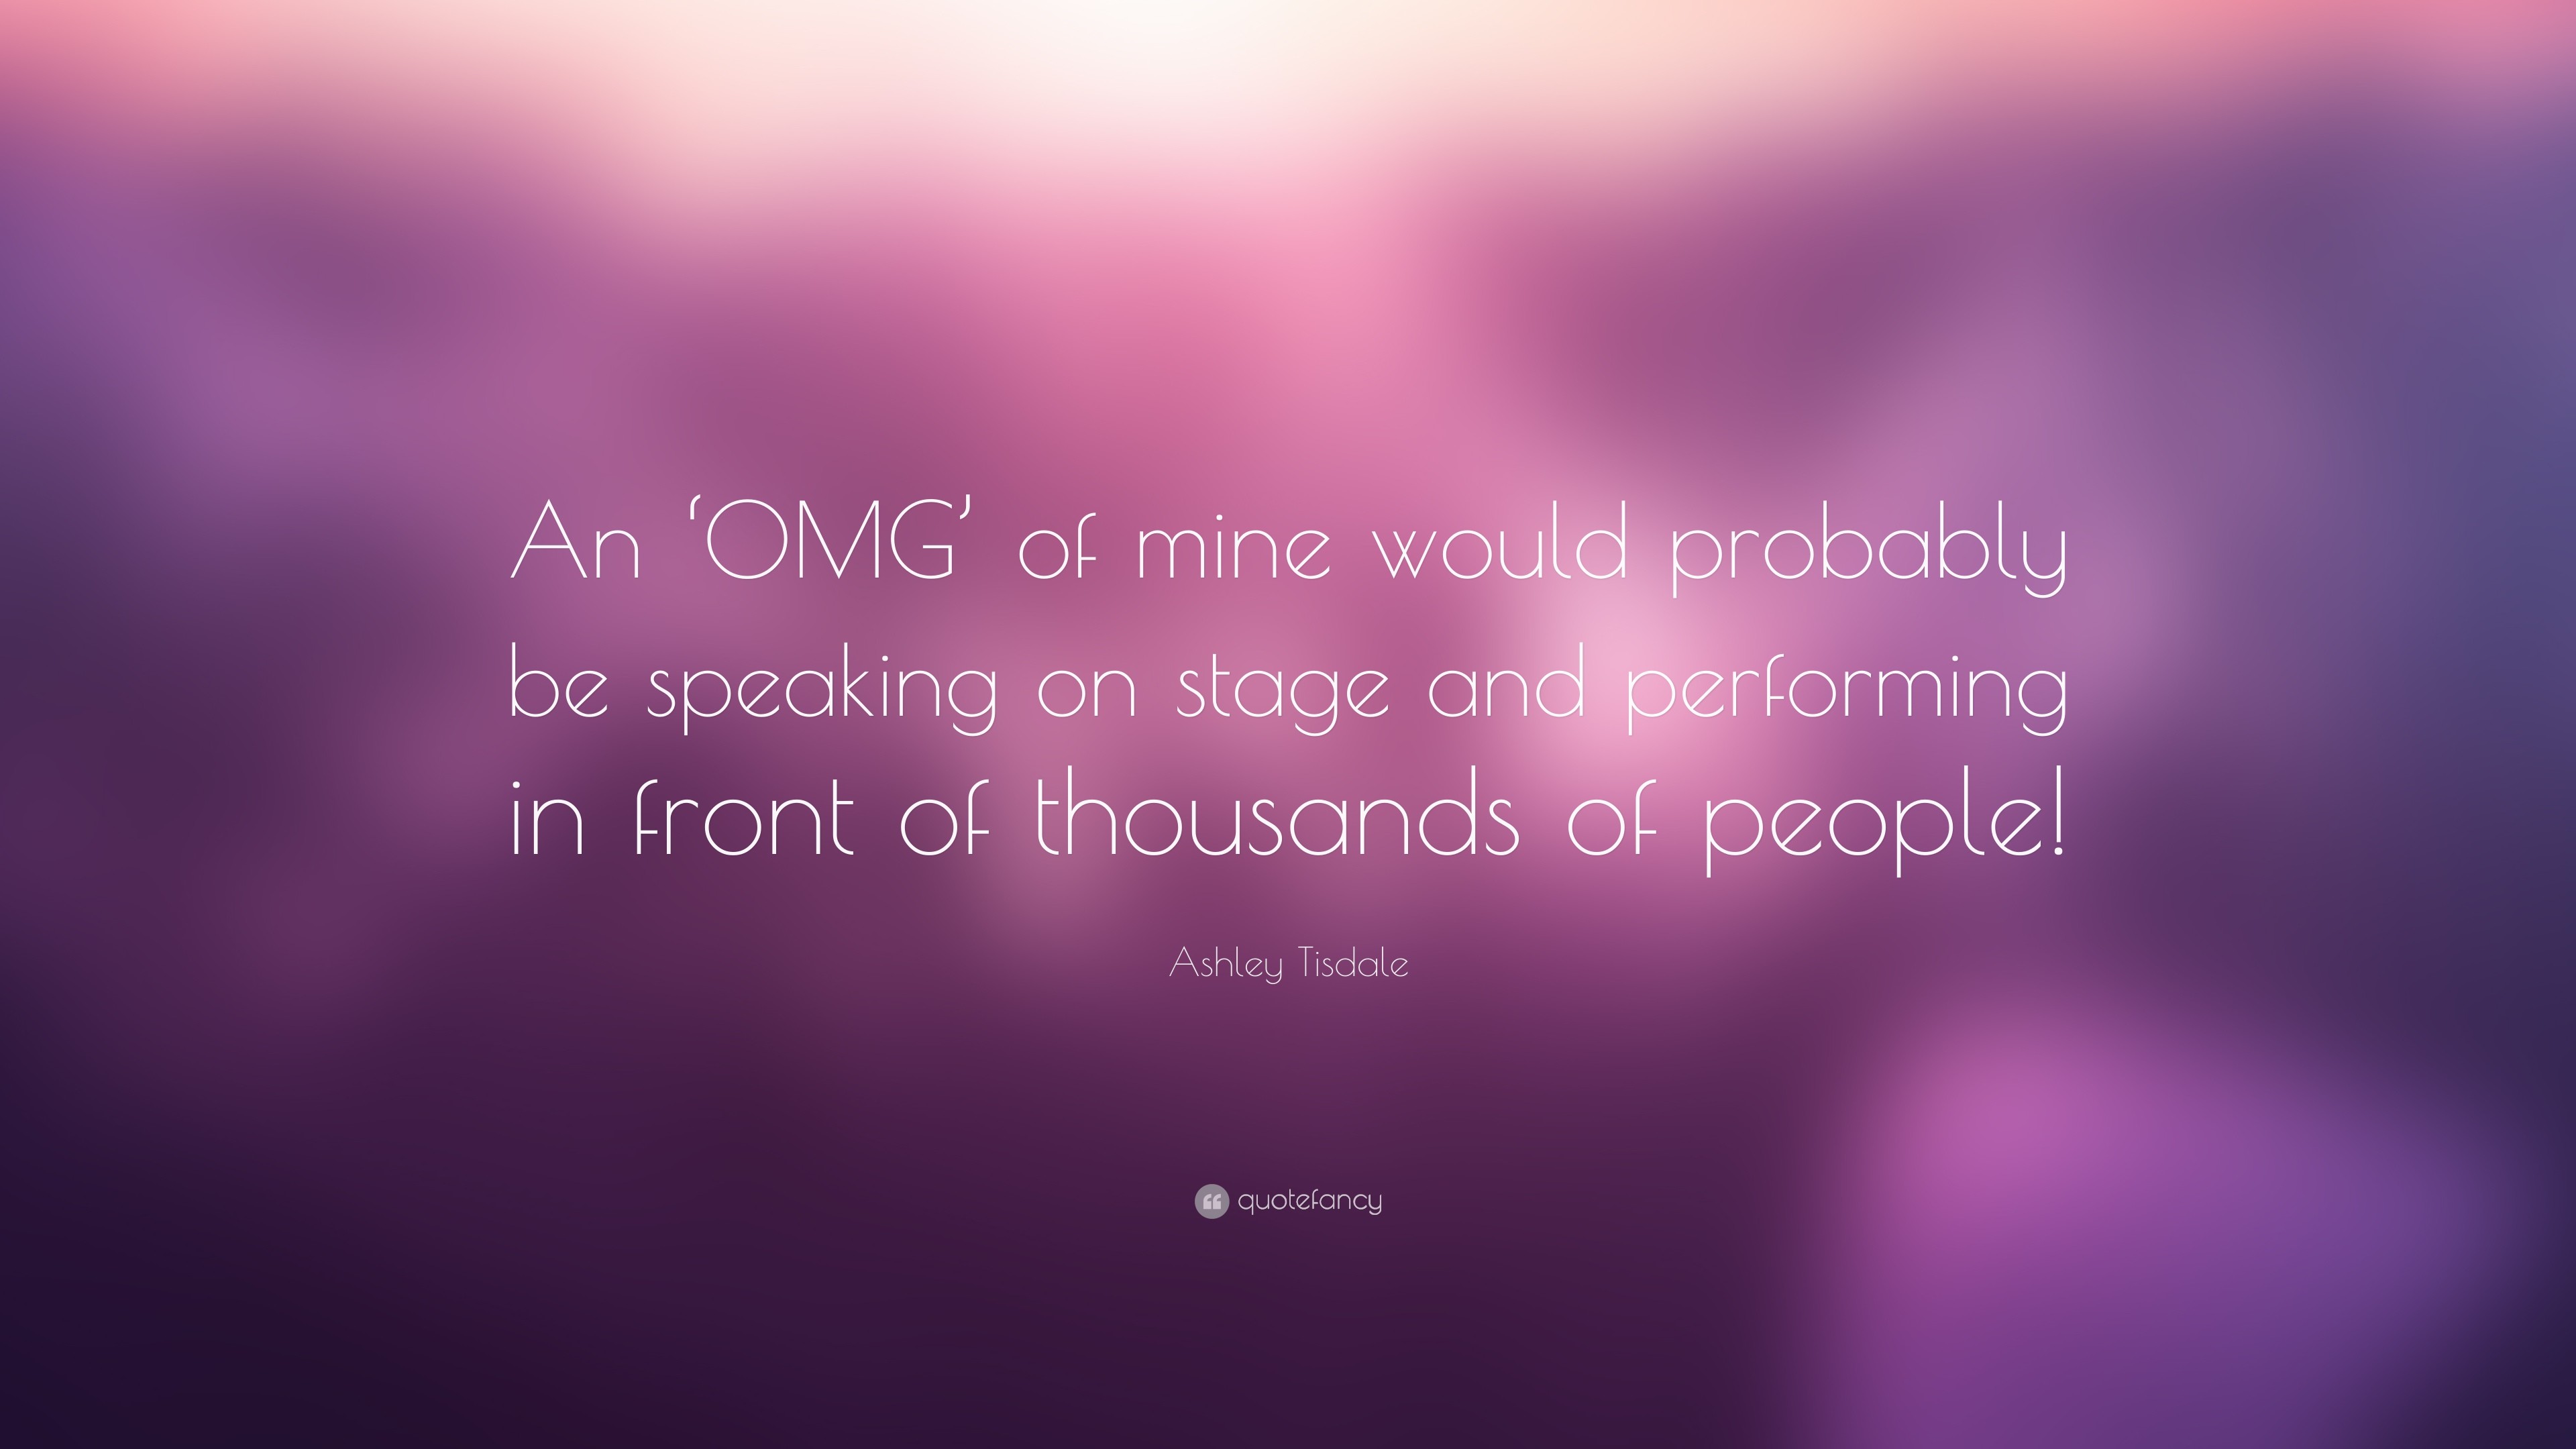 3840x2160 Ashley Tisdale Quote: “An 'OMG' of mine would probably be speaking on